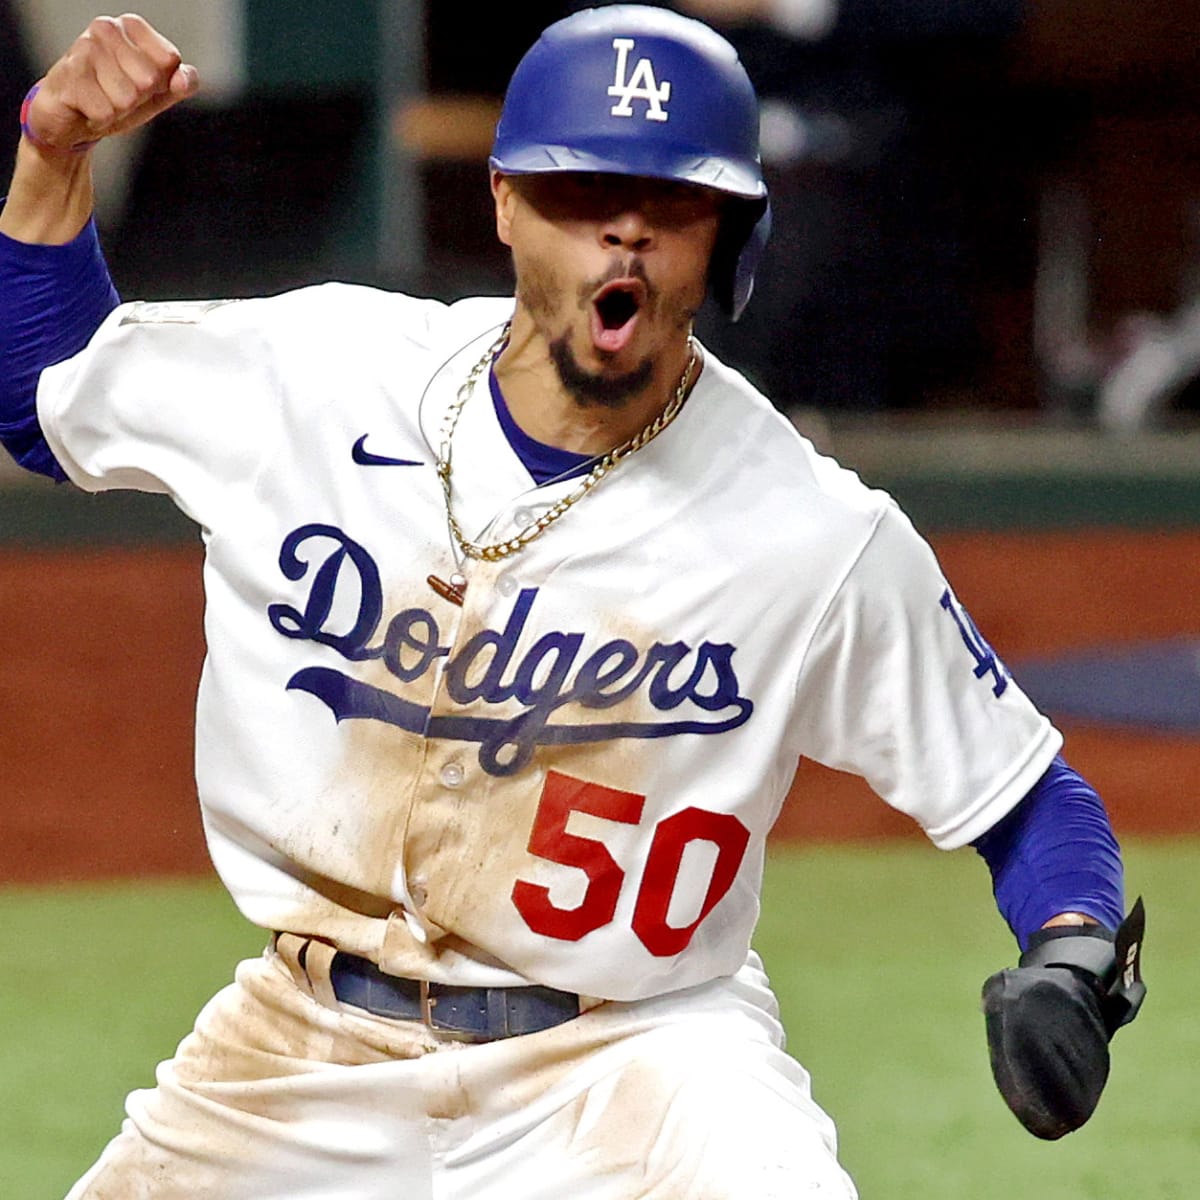 Mookie Betts extension makes Dodgers title favorites for years to come